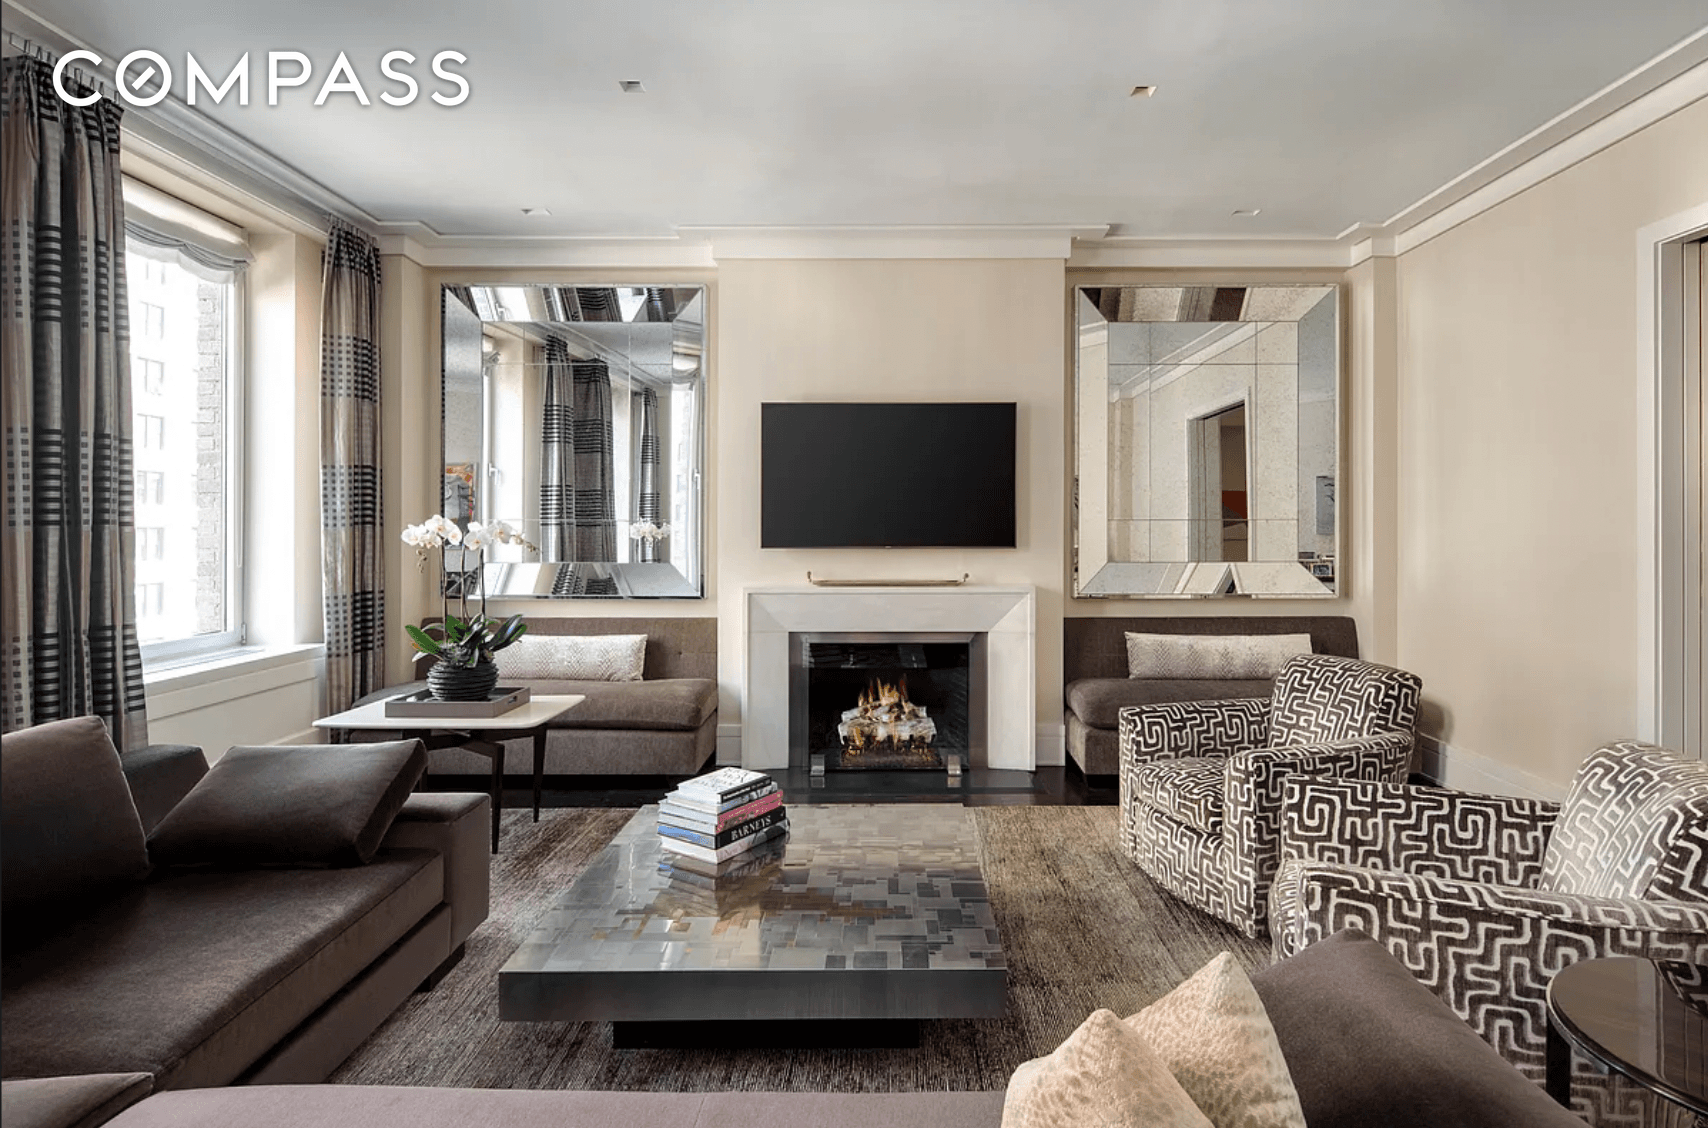 Welcome to this spacious and elegant 4 bedroom convertible 5 bedroom apartment on the Upper East Side, overlooking Park Avenue and facing East for stunning natural light throughout the day.